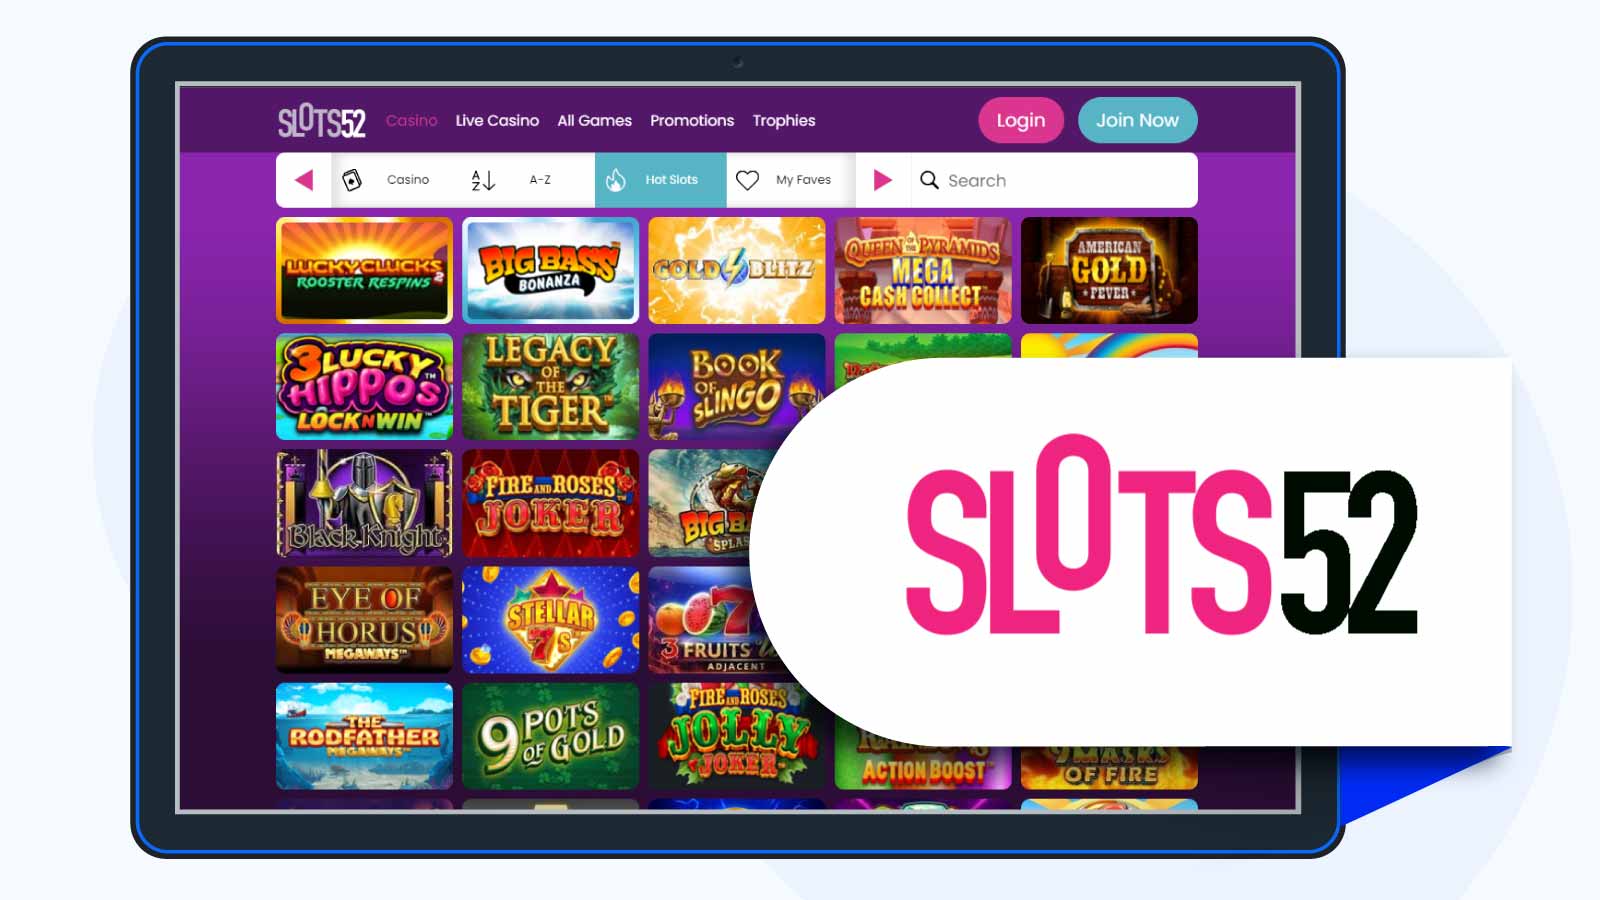 Slots52 Very high number of spins awarded